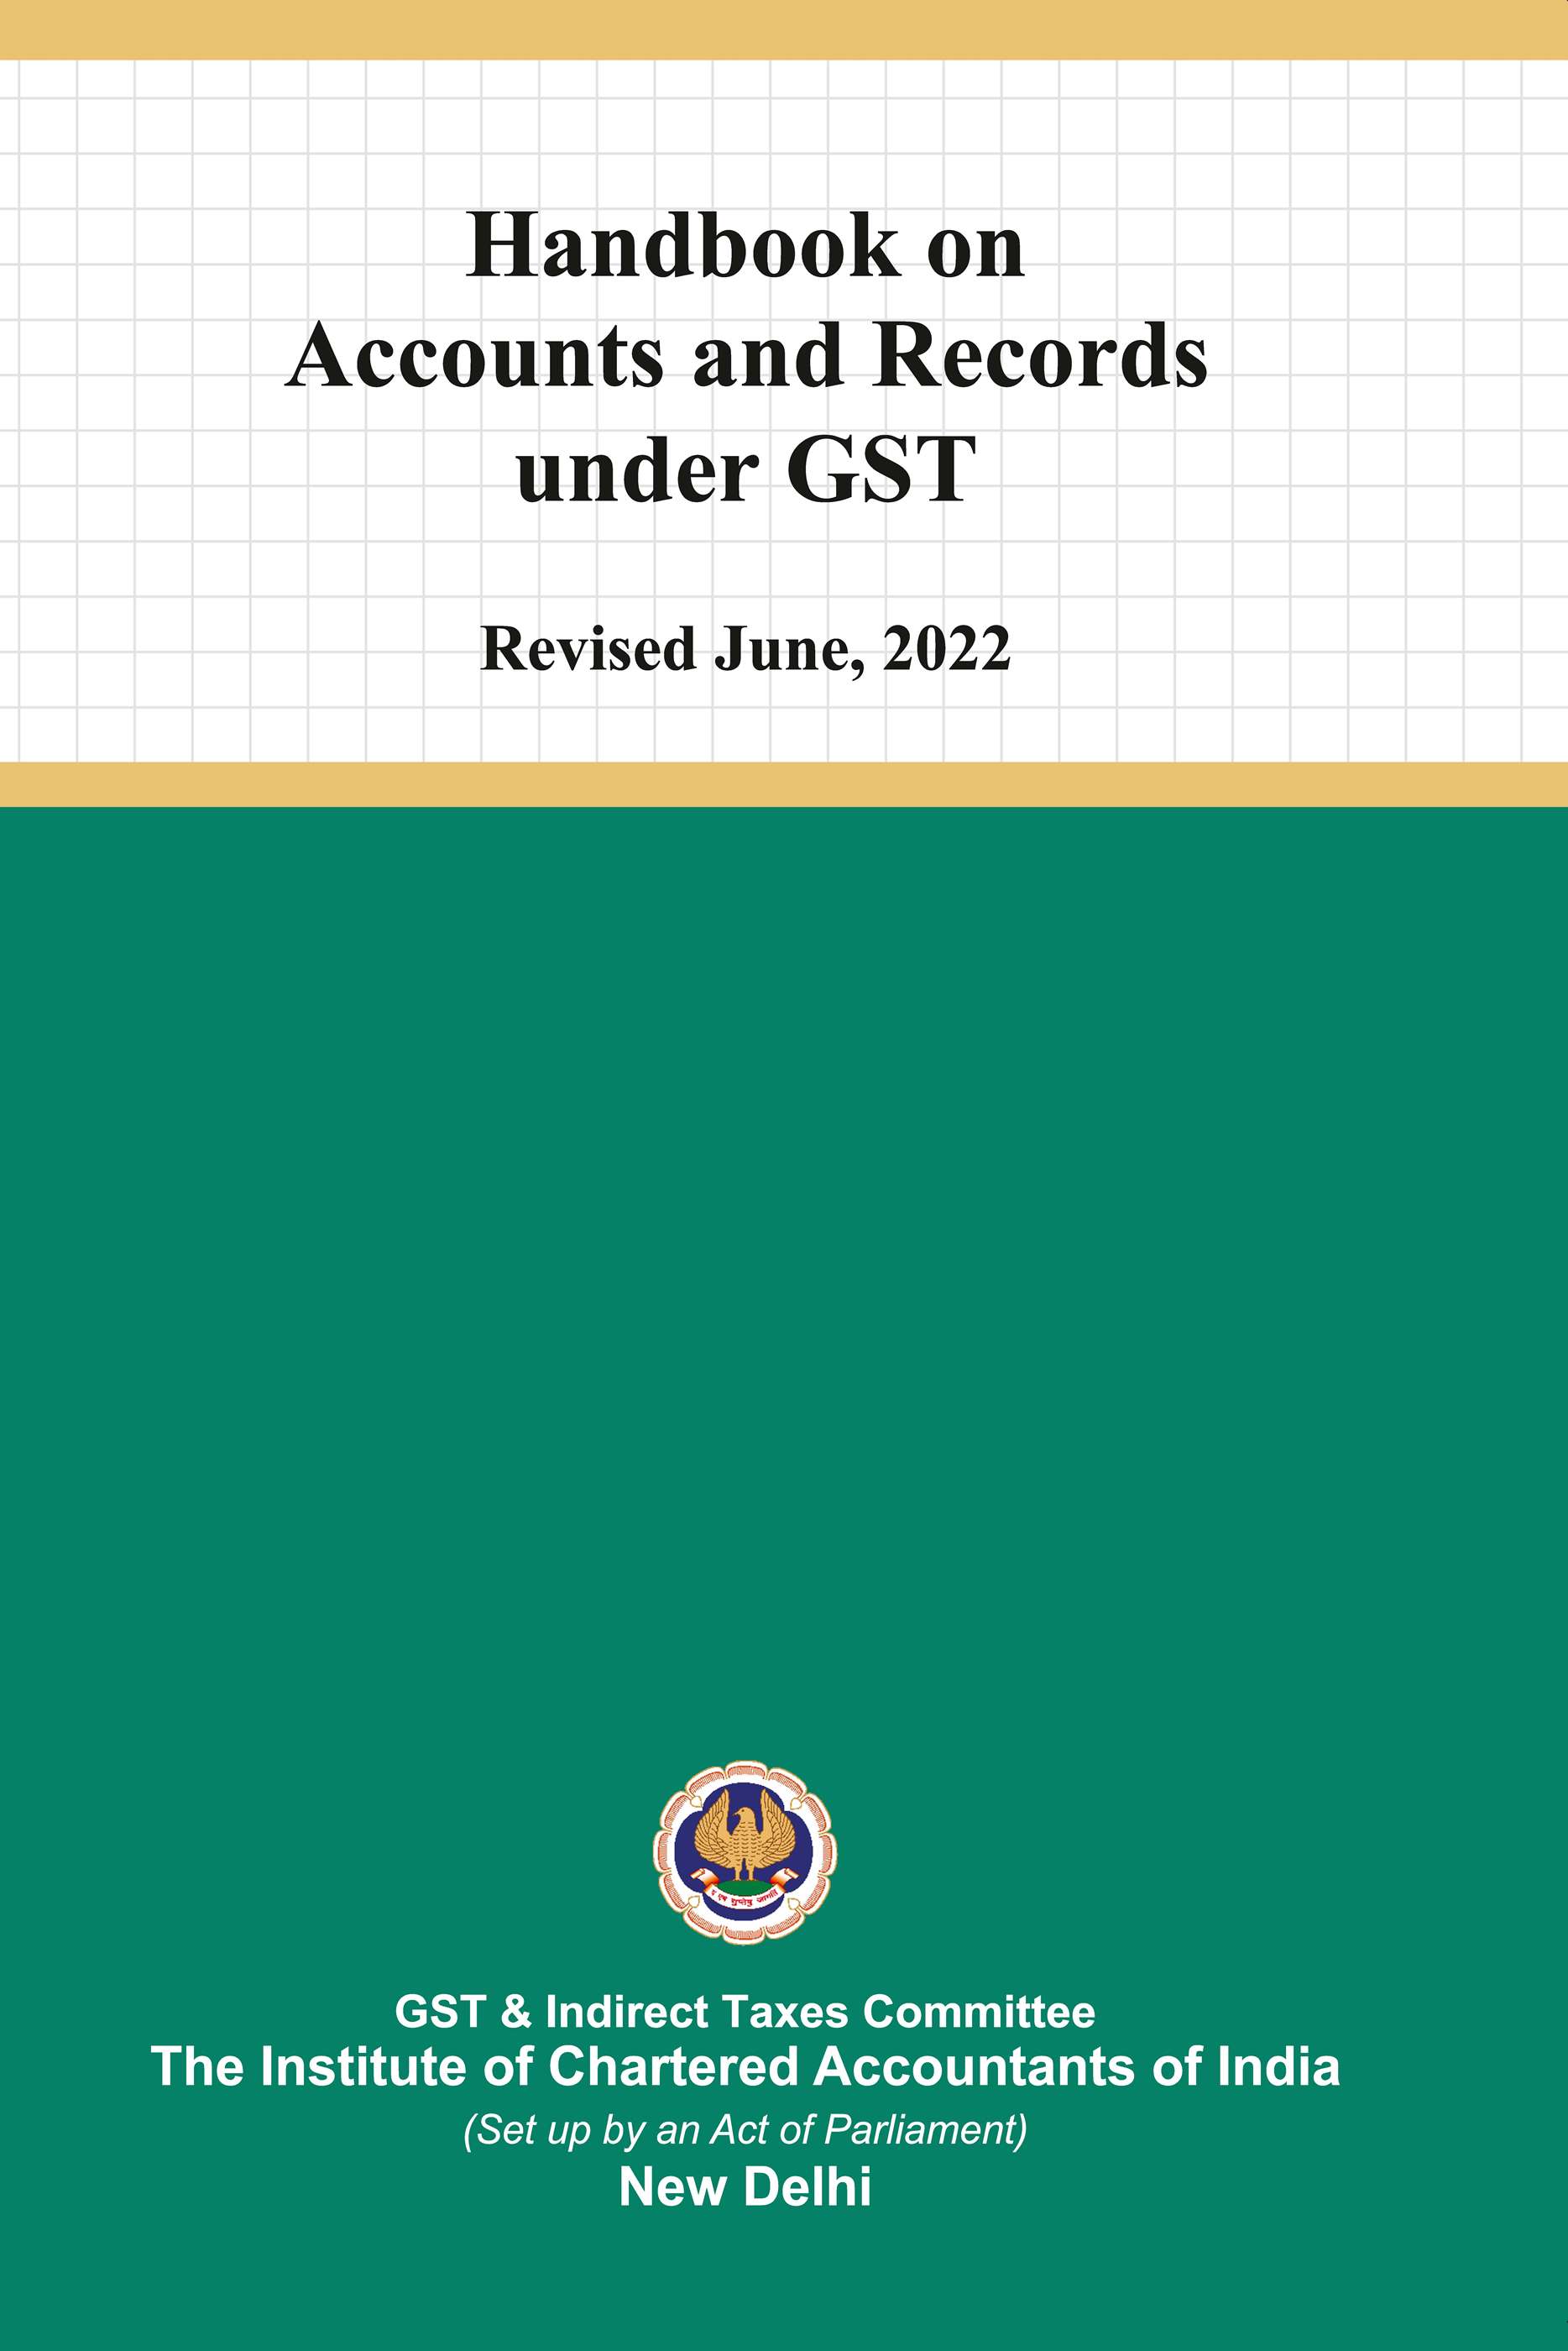 Handbook on Accounts and Records under GST (Revised June, 2022)